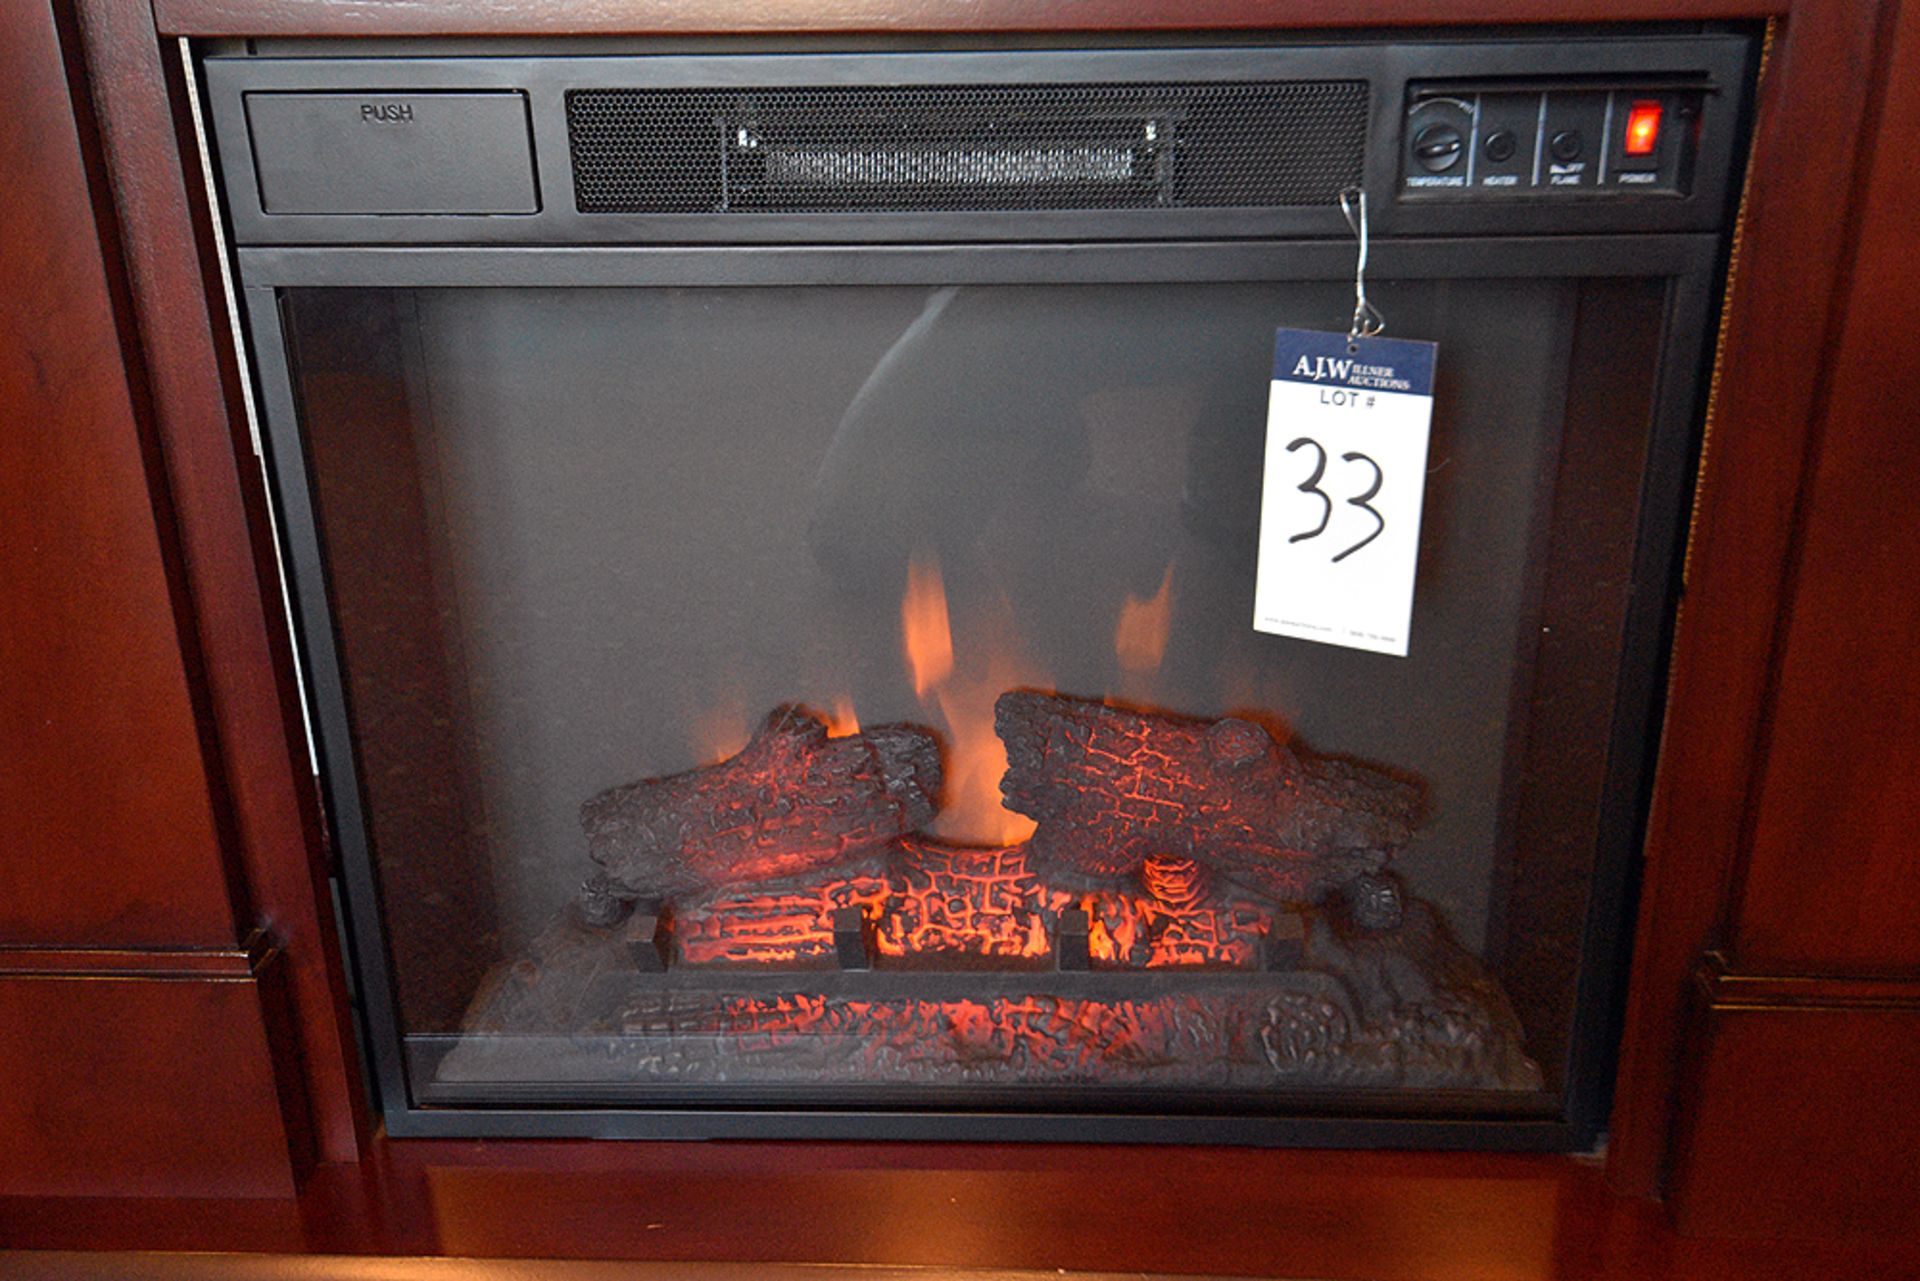 Twin Star Electric Fireplace - Image 5 of 5